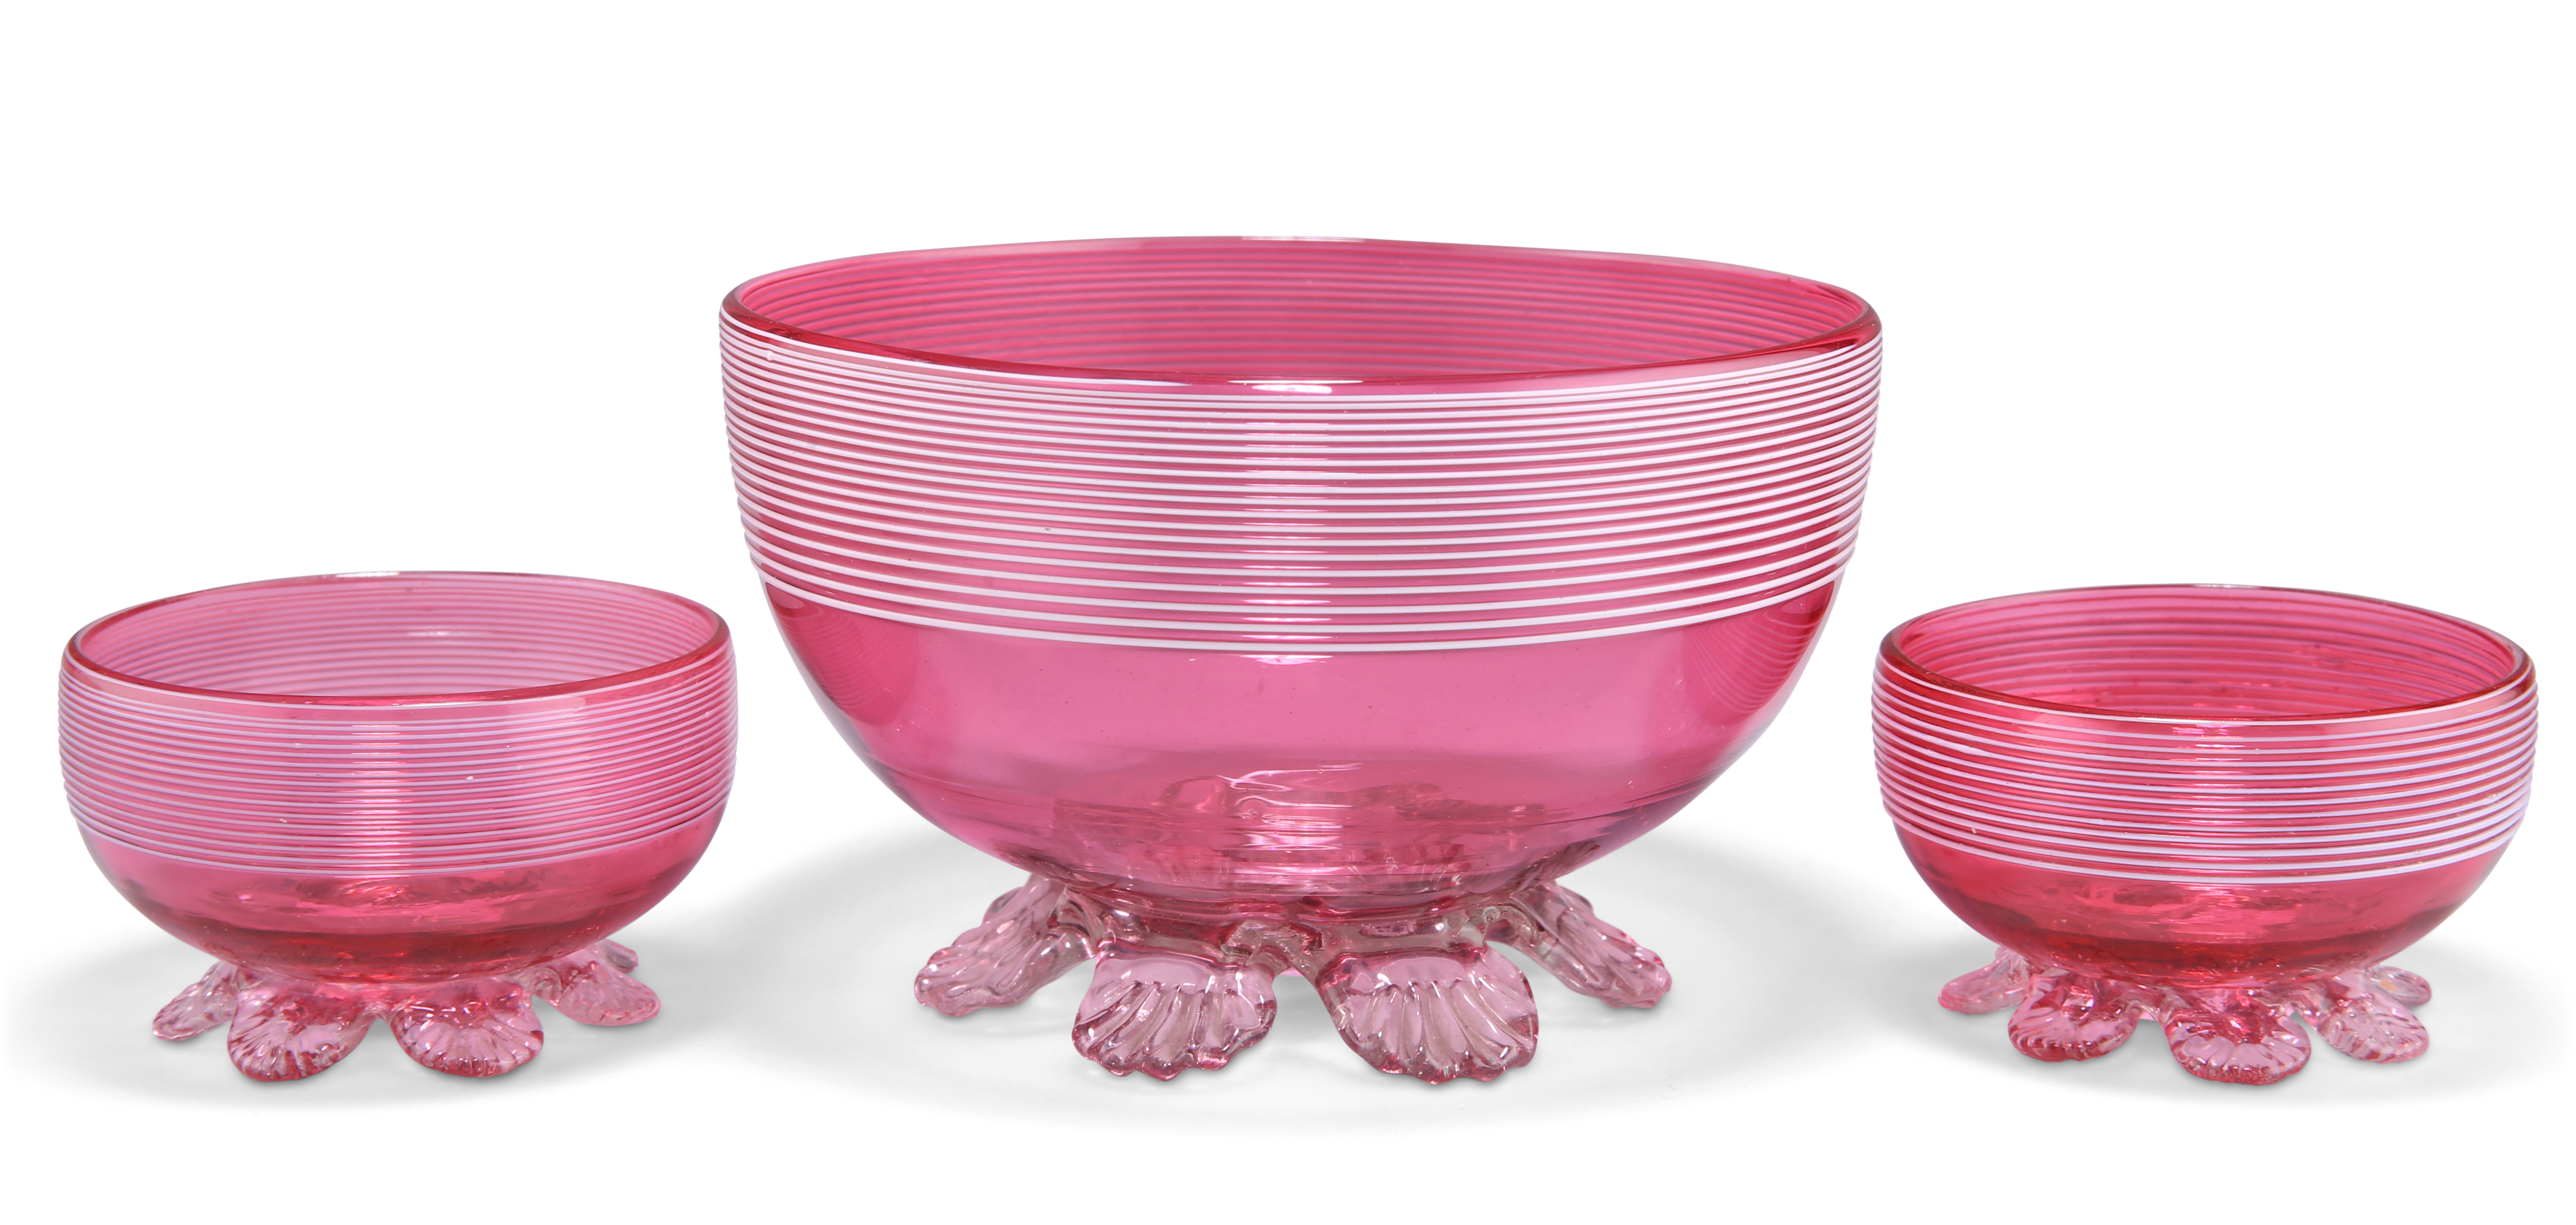 A LARGE CRANBERRY GLASS BOWL AND A SMALL PAIR OF BOWLS